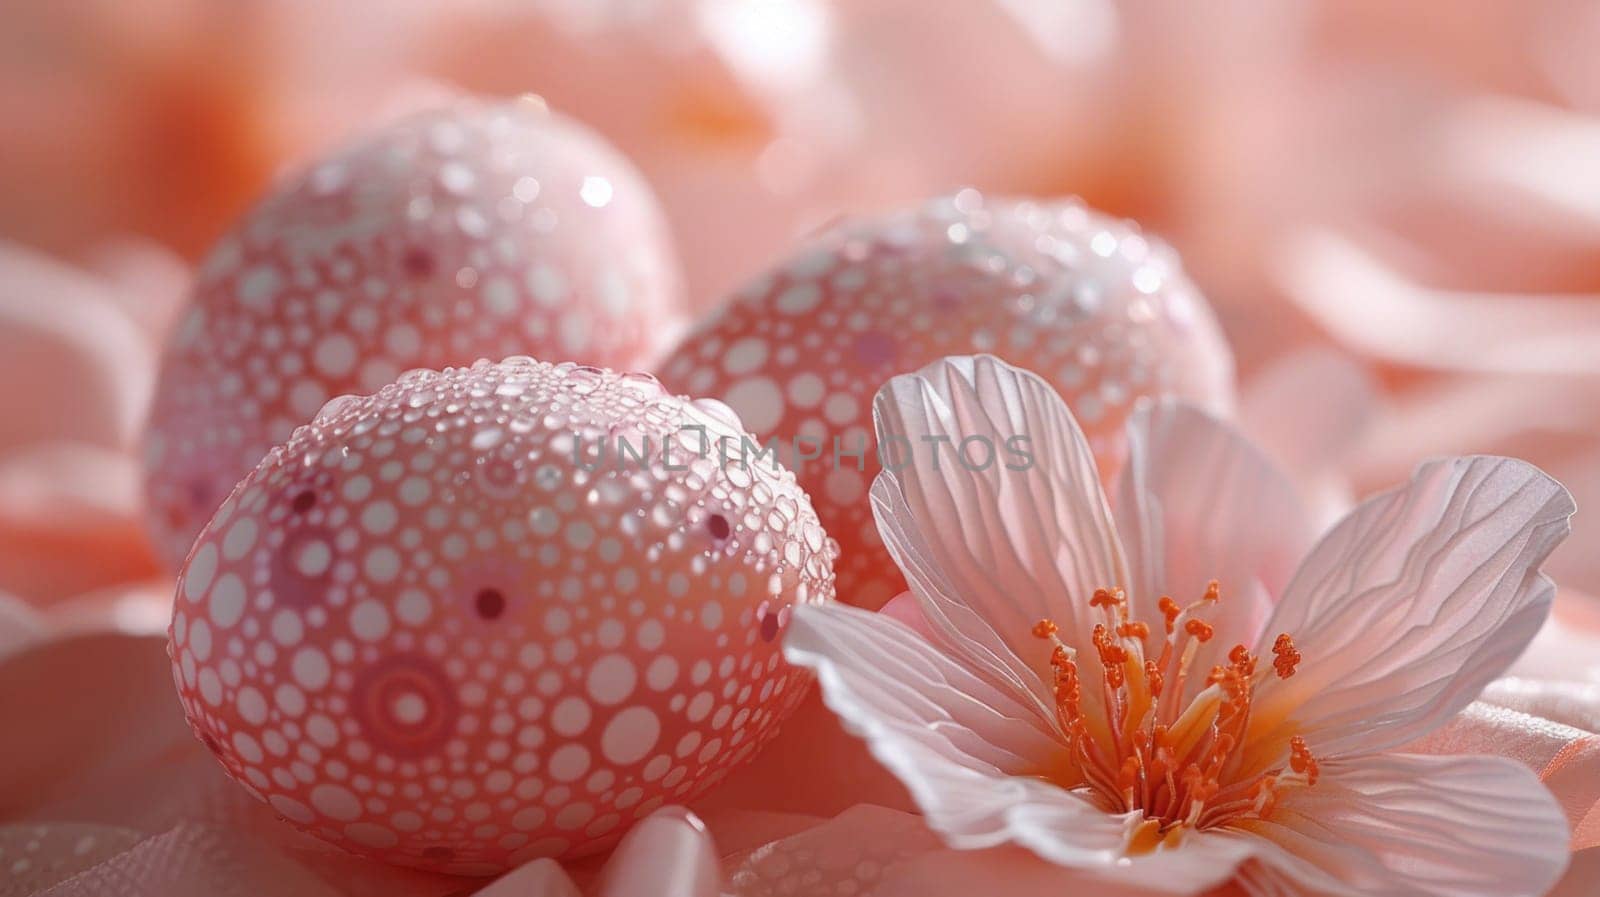 A close-up view of vibrant pink balls and a delicate flower in full bloom by but_photo